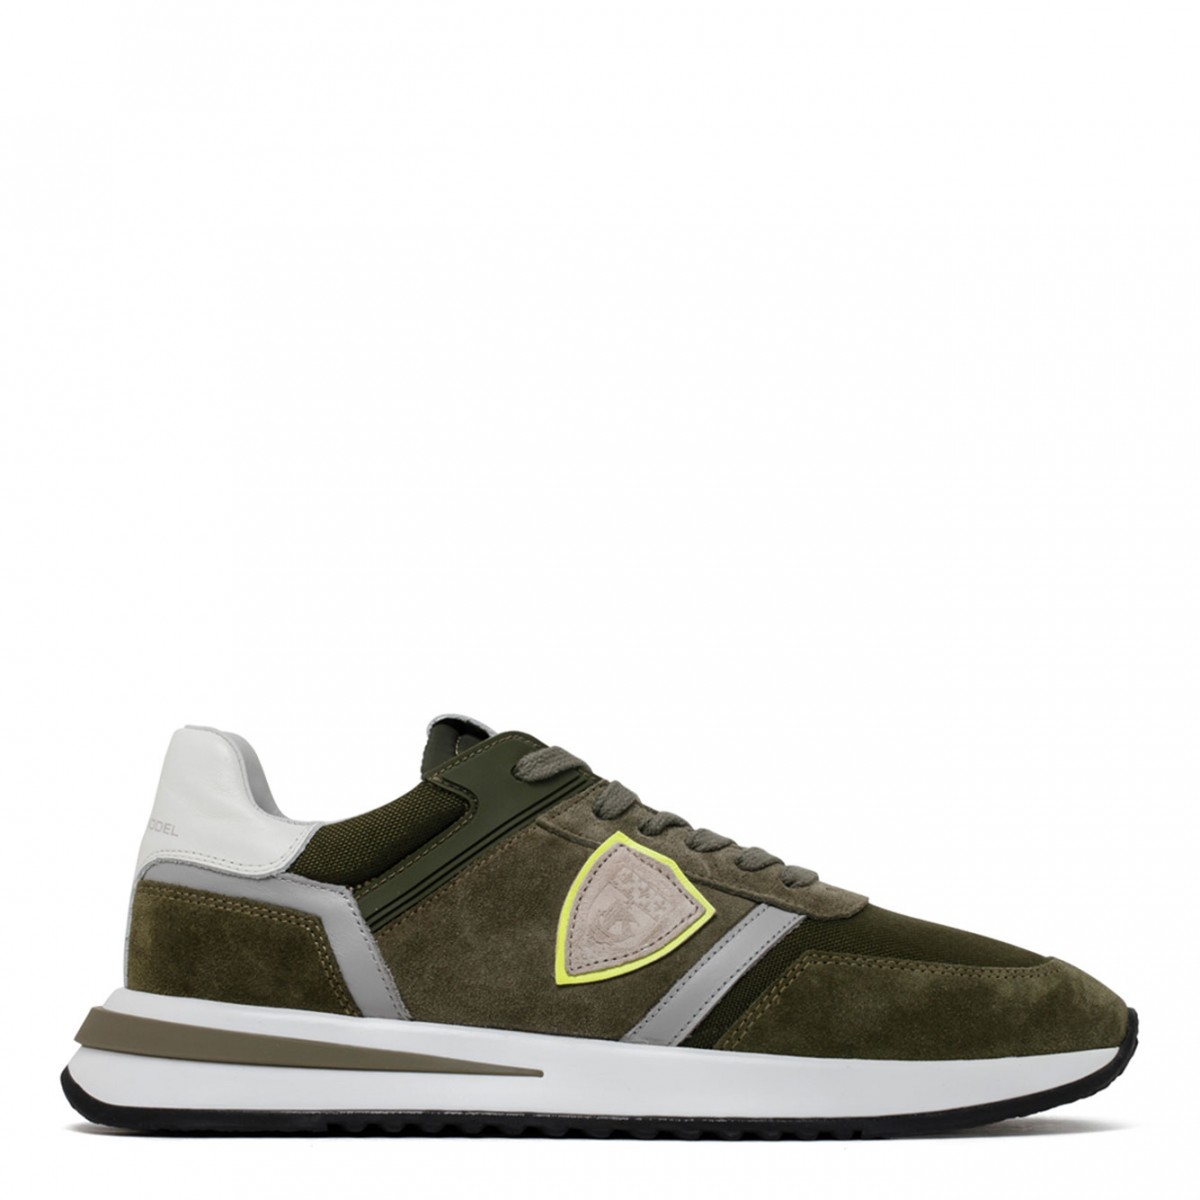 Military Green and White Suede Tropez 2.1 Sneakers